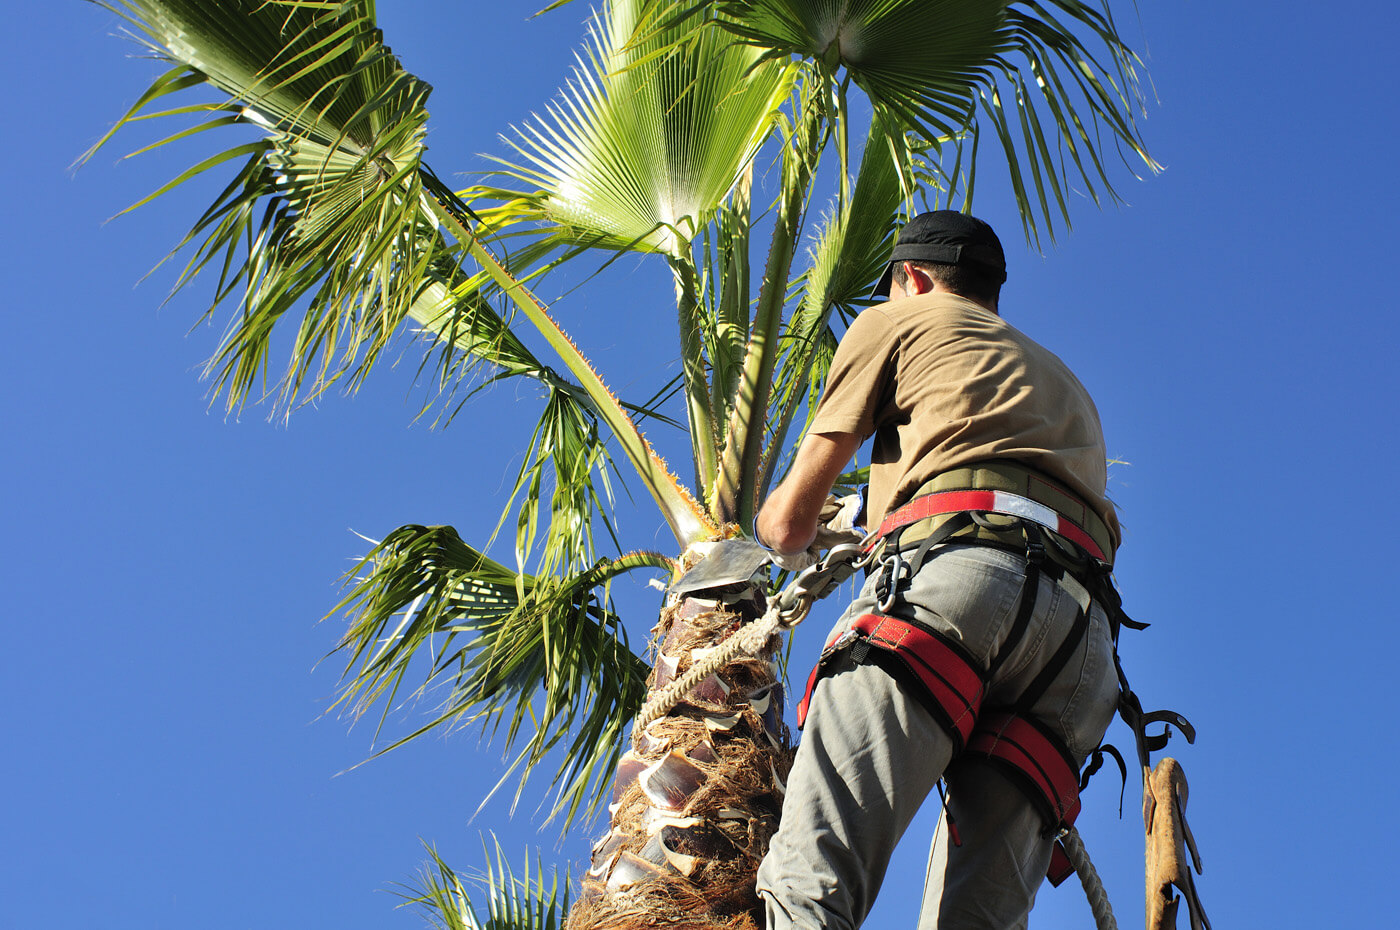 Landscaper maintaining a palm tree